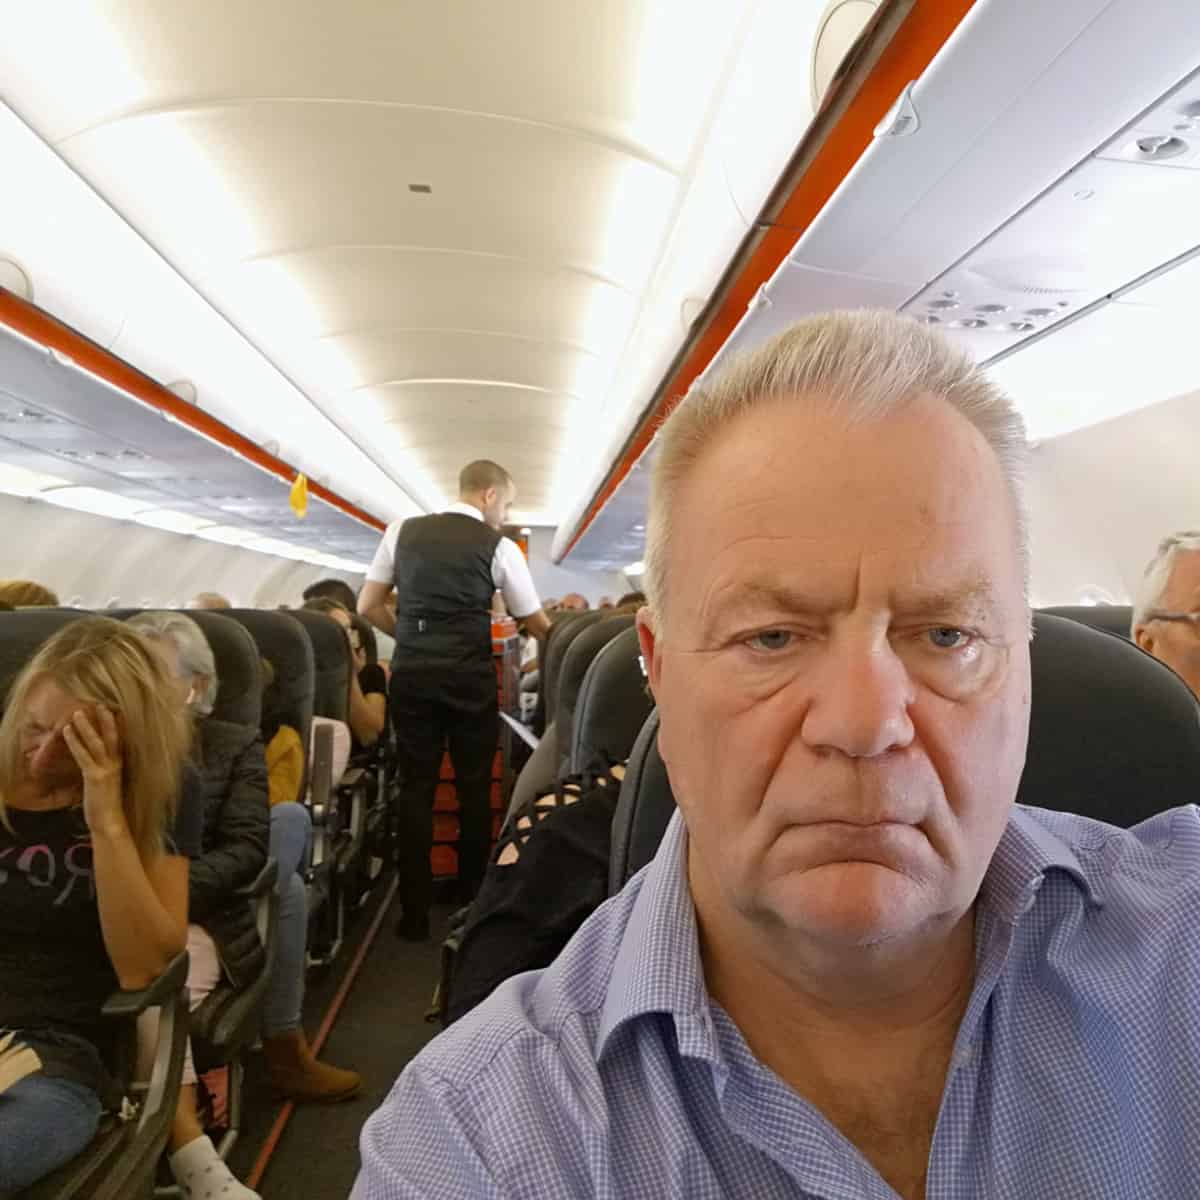 Can You Take Vapes on a Plane? Flying with Vape - the Rules! 2